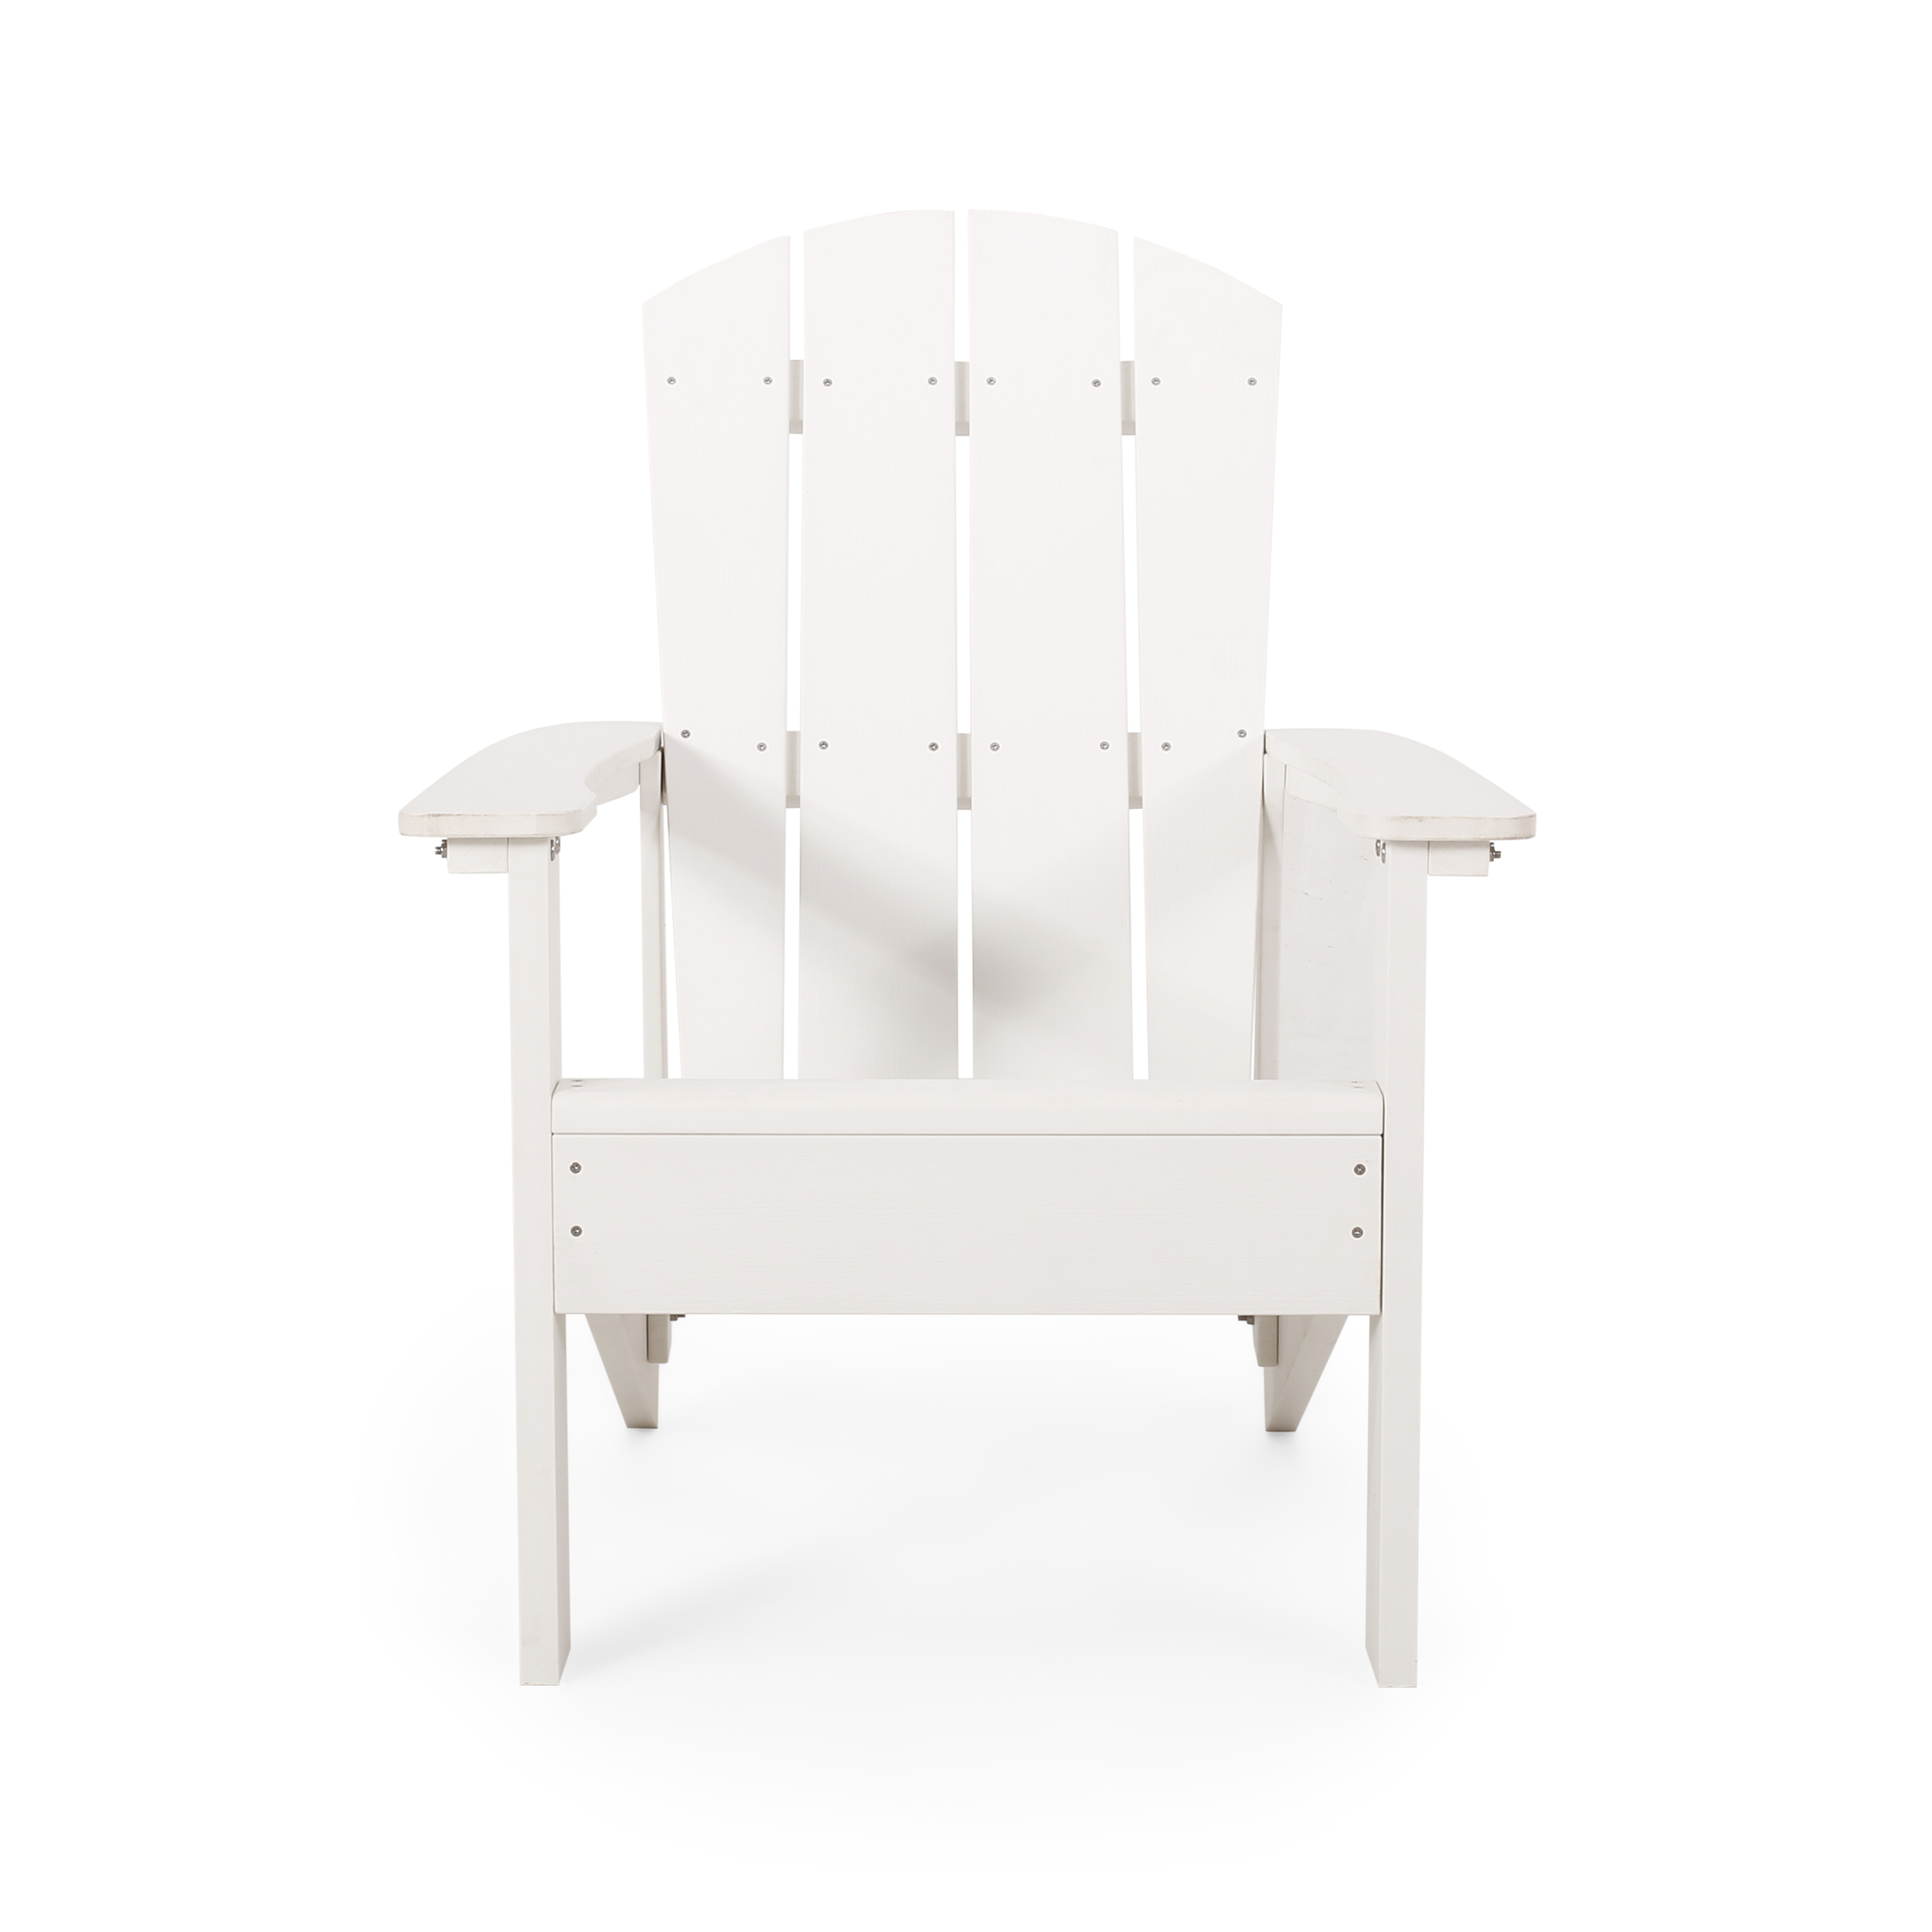 Classic Pure White Outdoor Solid Wood Adirondack Chair Garden Lounge Chair - image 2 of 7